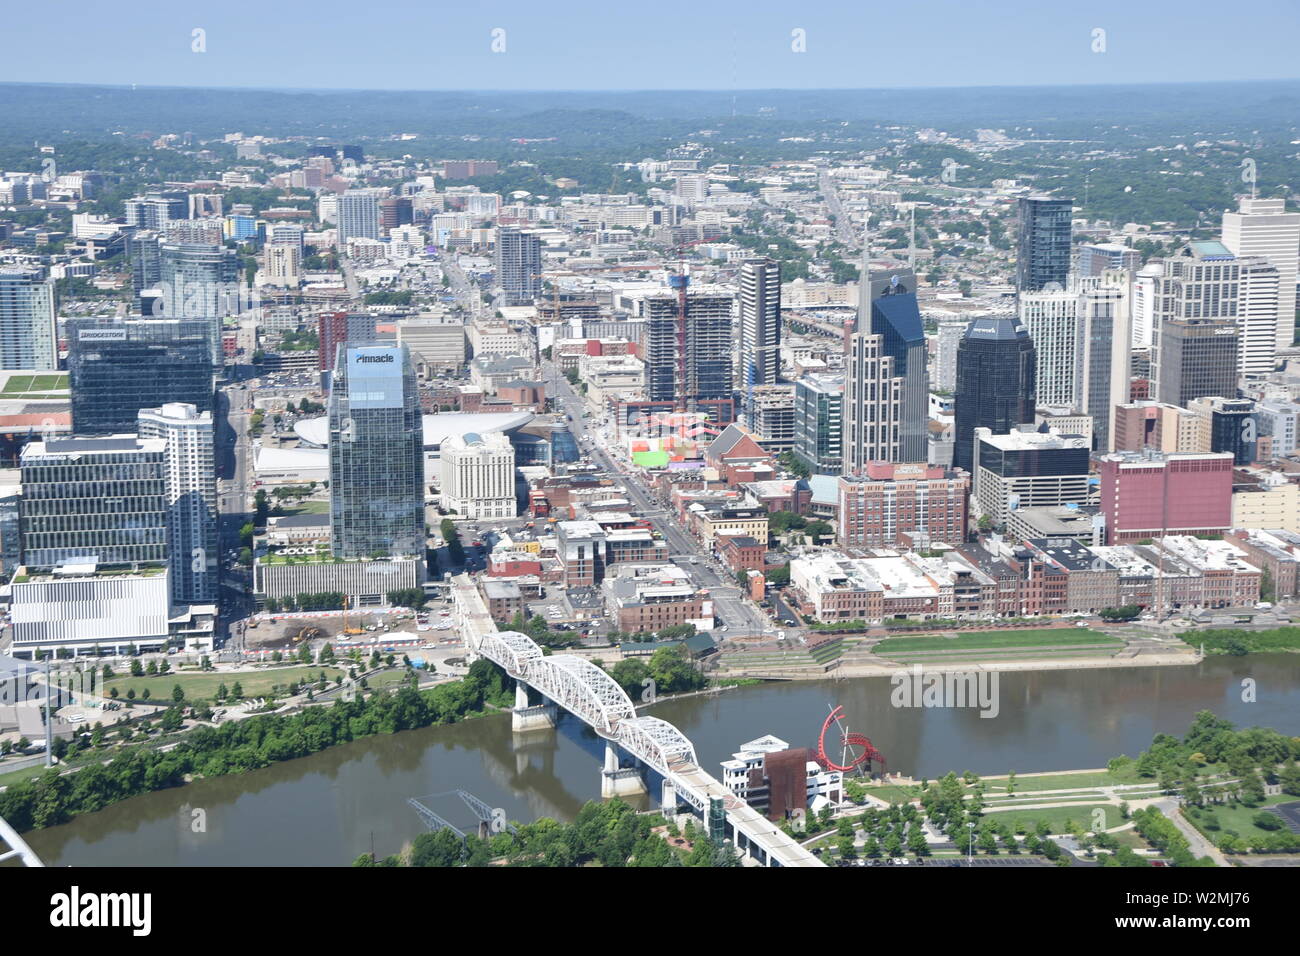 A photo of downtown Nashville, Tennessee taken from the air June 21, 2019. Members of the Tennessee Army National Guard’s 1-230th Assault Helicopter Battalion took several members from the Tennessee Air National Guard’s 118th Wing for a flight on a UH-60 Black Hawk around Nashville and the surrounding counties. (U.S. Air National Guard photo by Staff Sgt. Anthony Agosti) Stock Photo